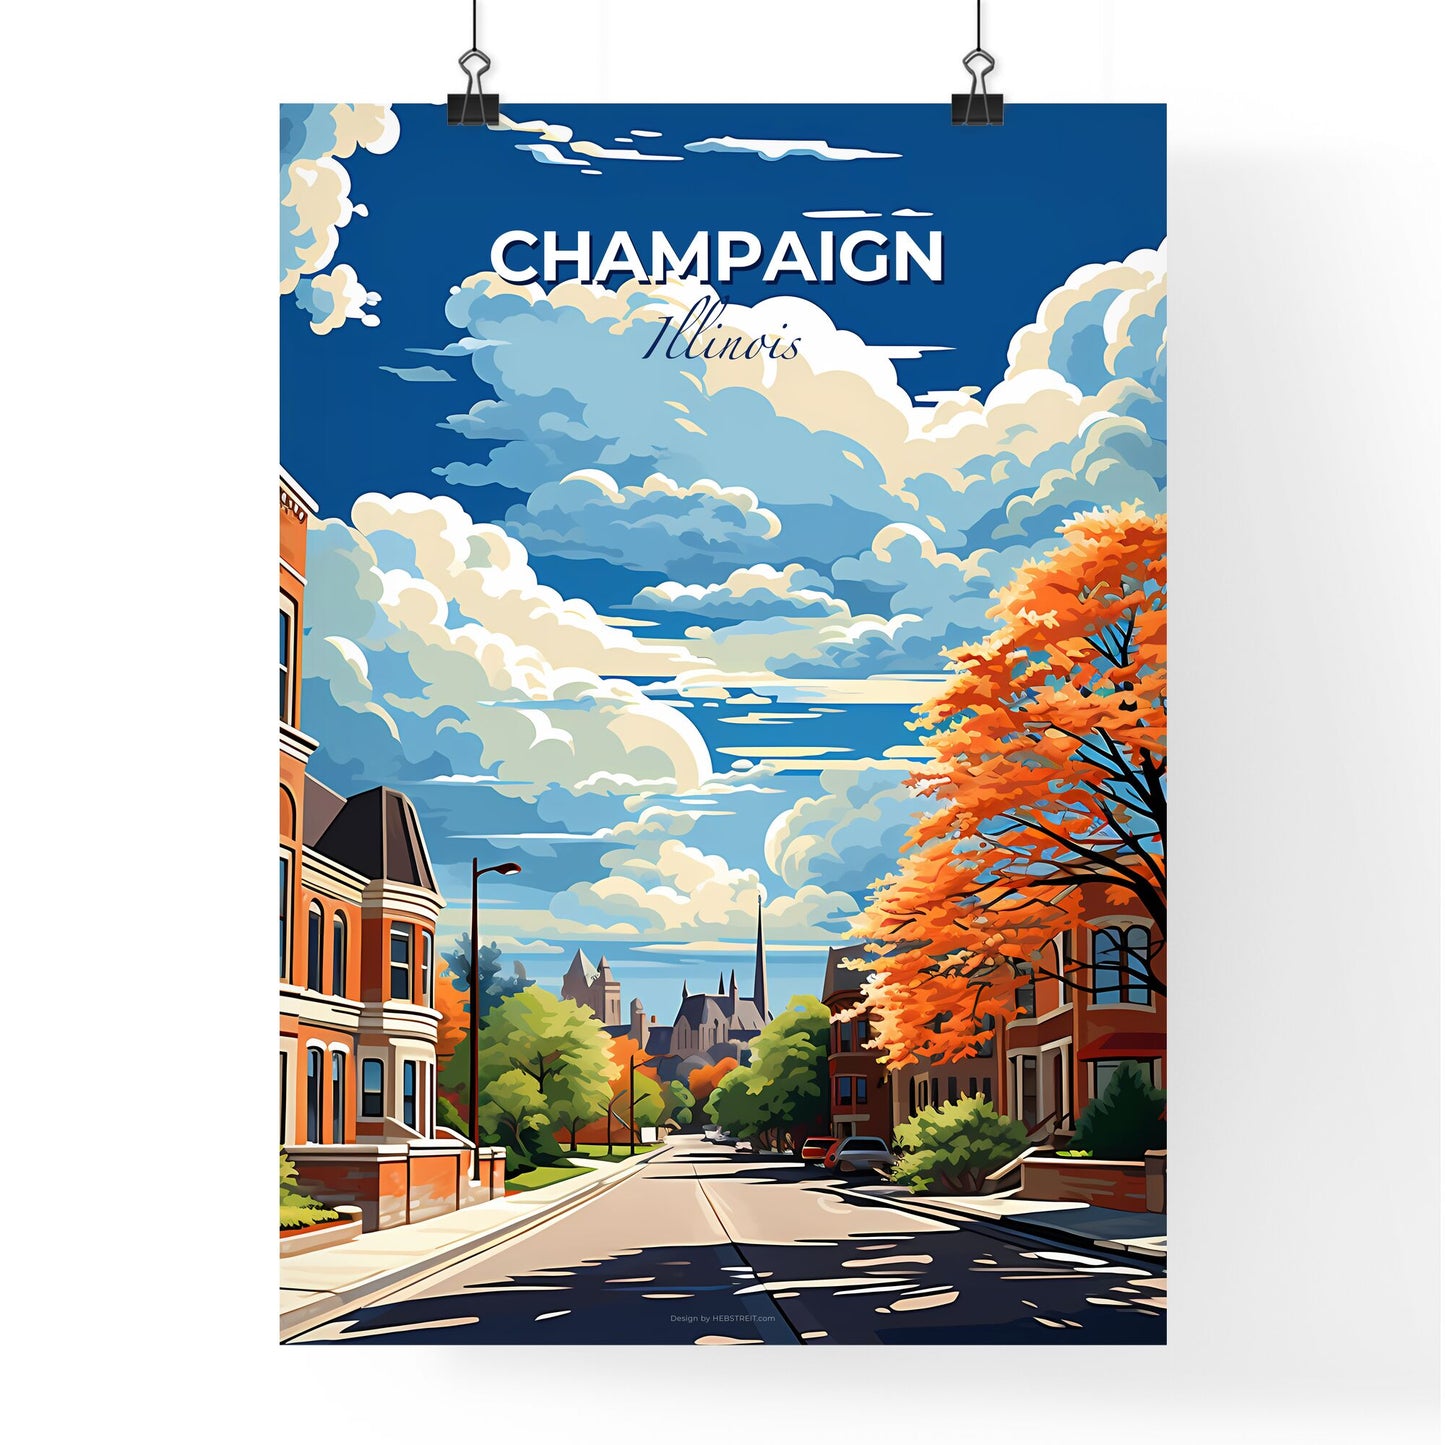 Champaign, Illinois, A Poster of a street with trees and buildings Default Title